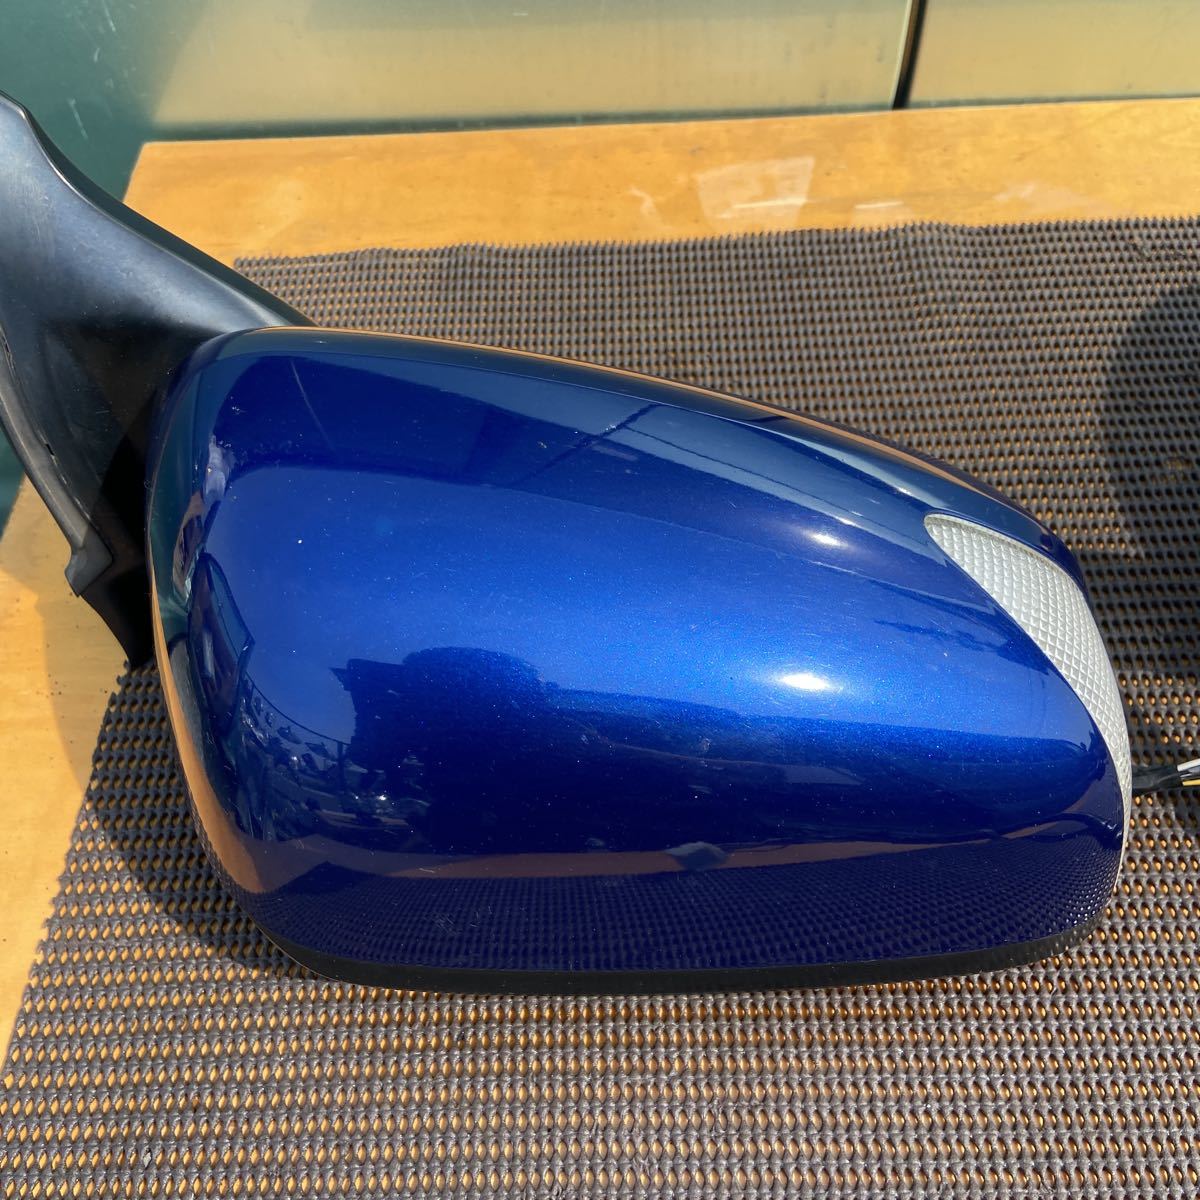  Honda Fit GE8 RS previous term original door mirror side mirror 9 pin mirror switch attaching inside with cover color B548P deep sapphire blue 